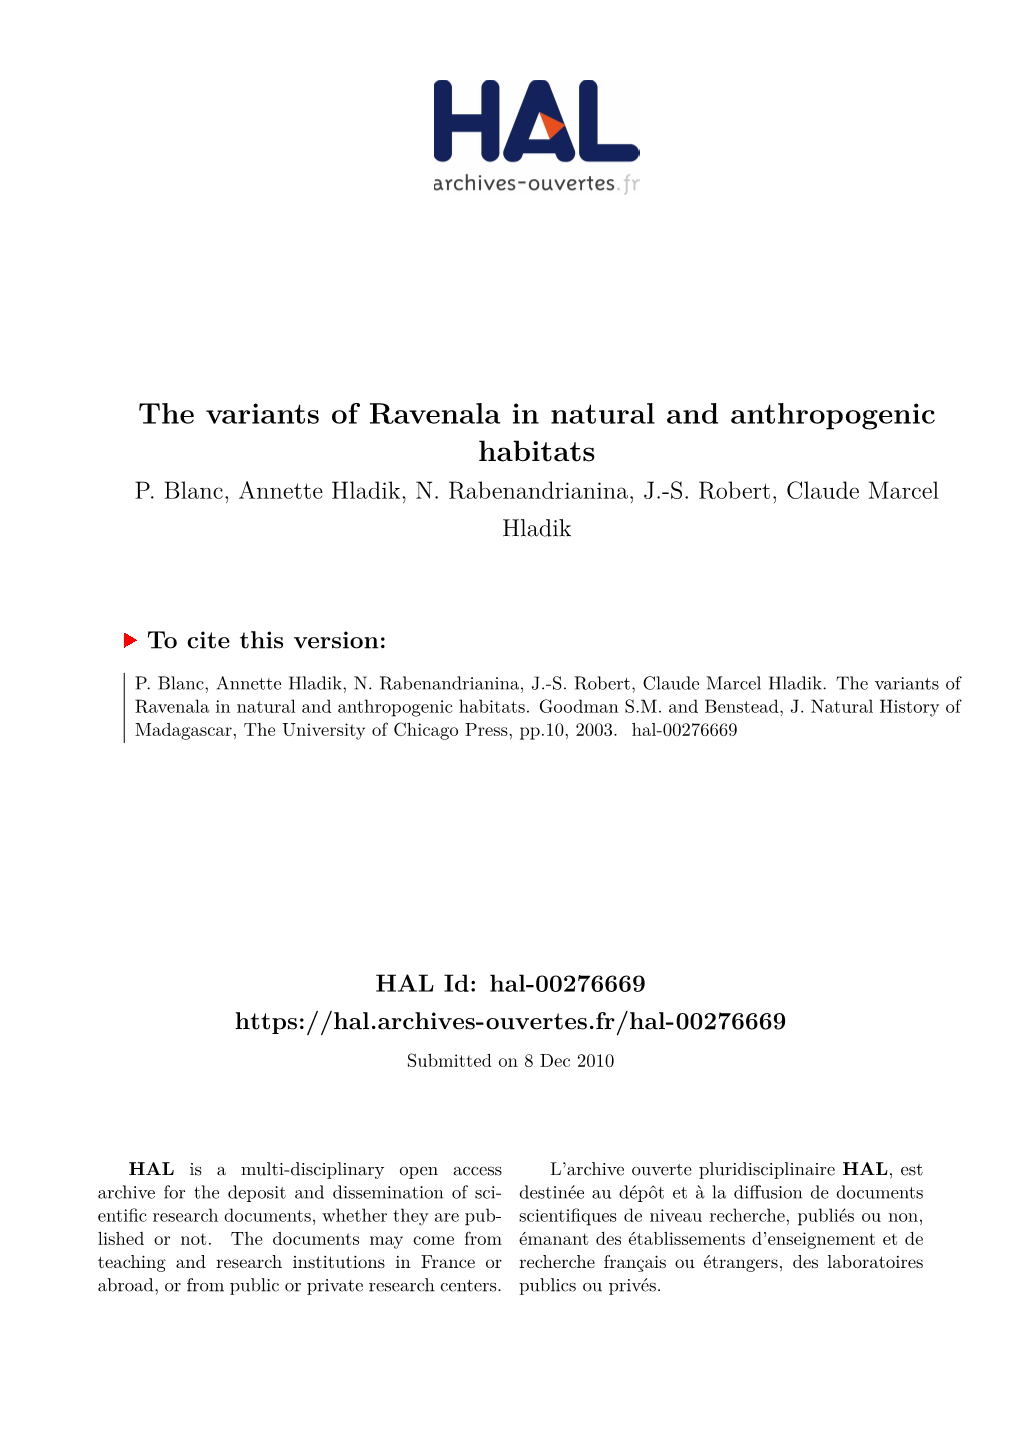 The Variants of Ravenala in Natural and Anthropogenic Habitats P